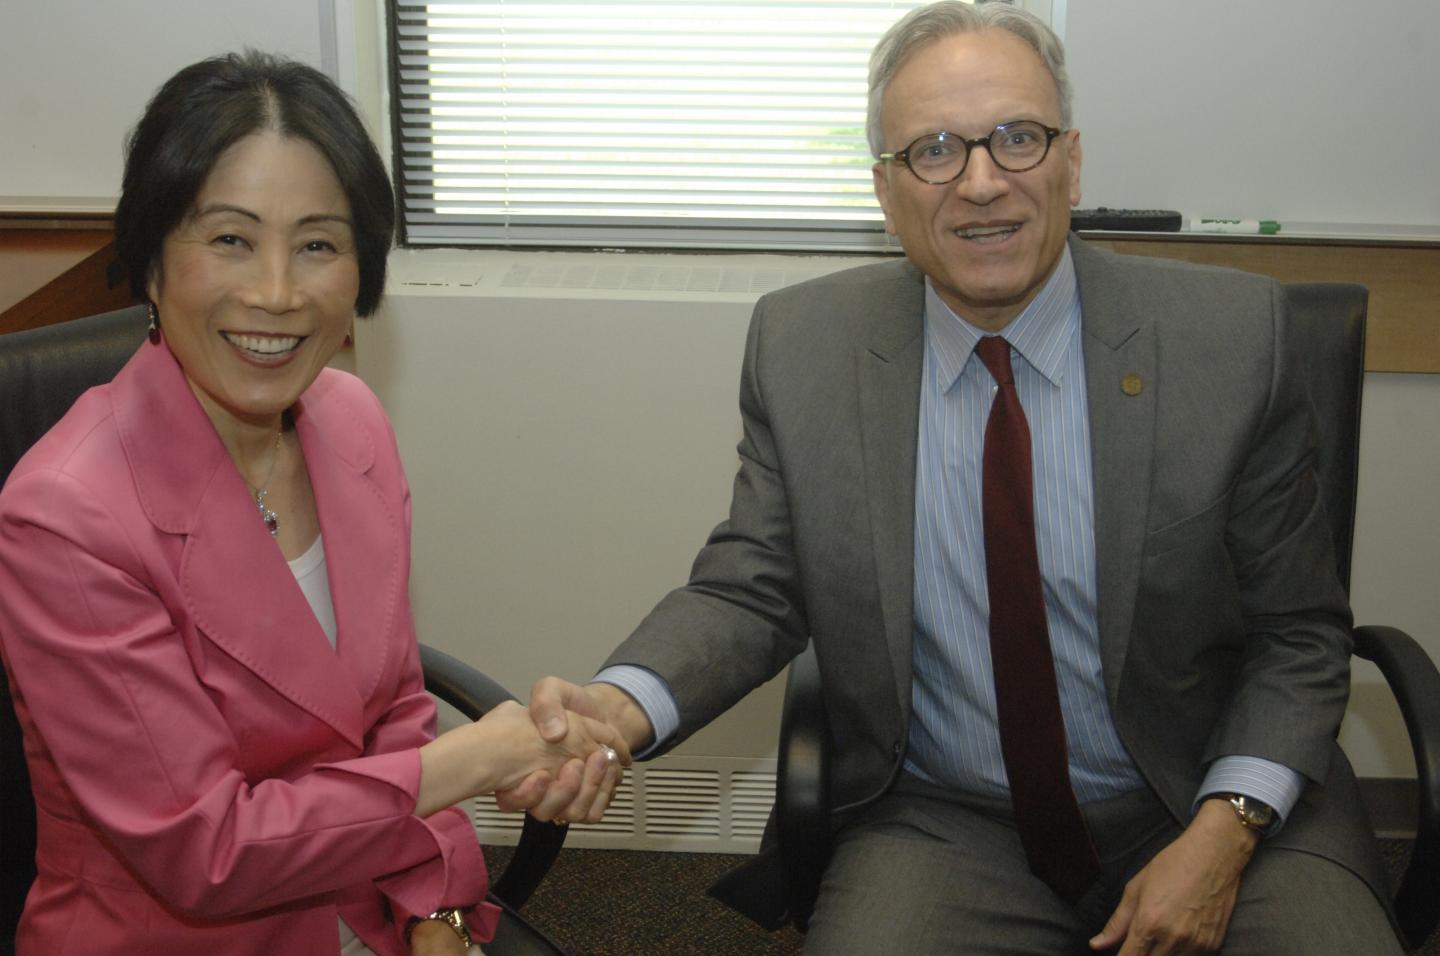 NJIT and MCCC Have Signed a Joint Agreement Designed to Improve Student Access across the Two Higher